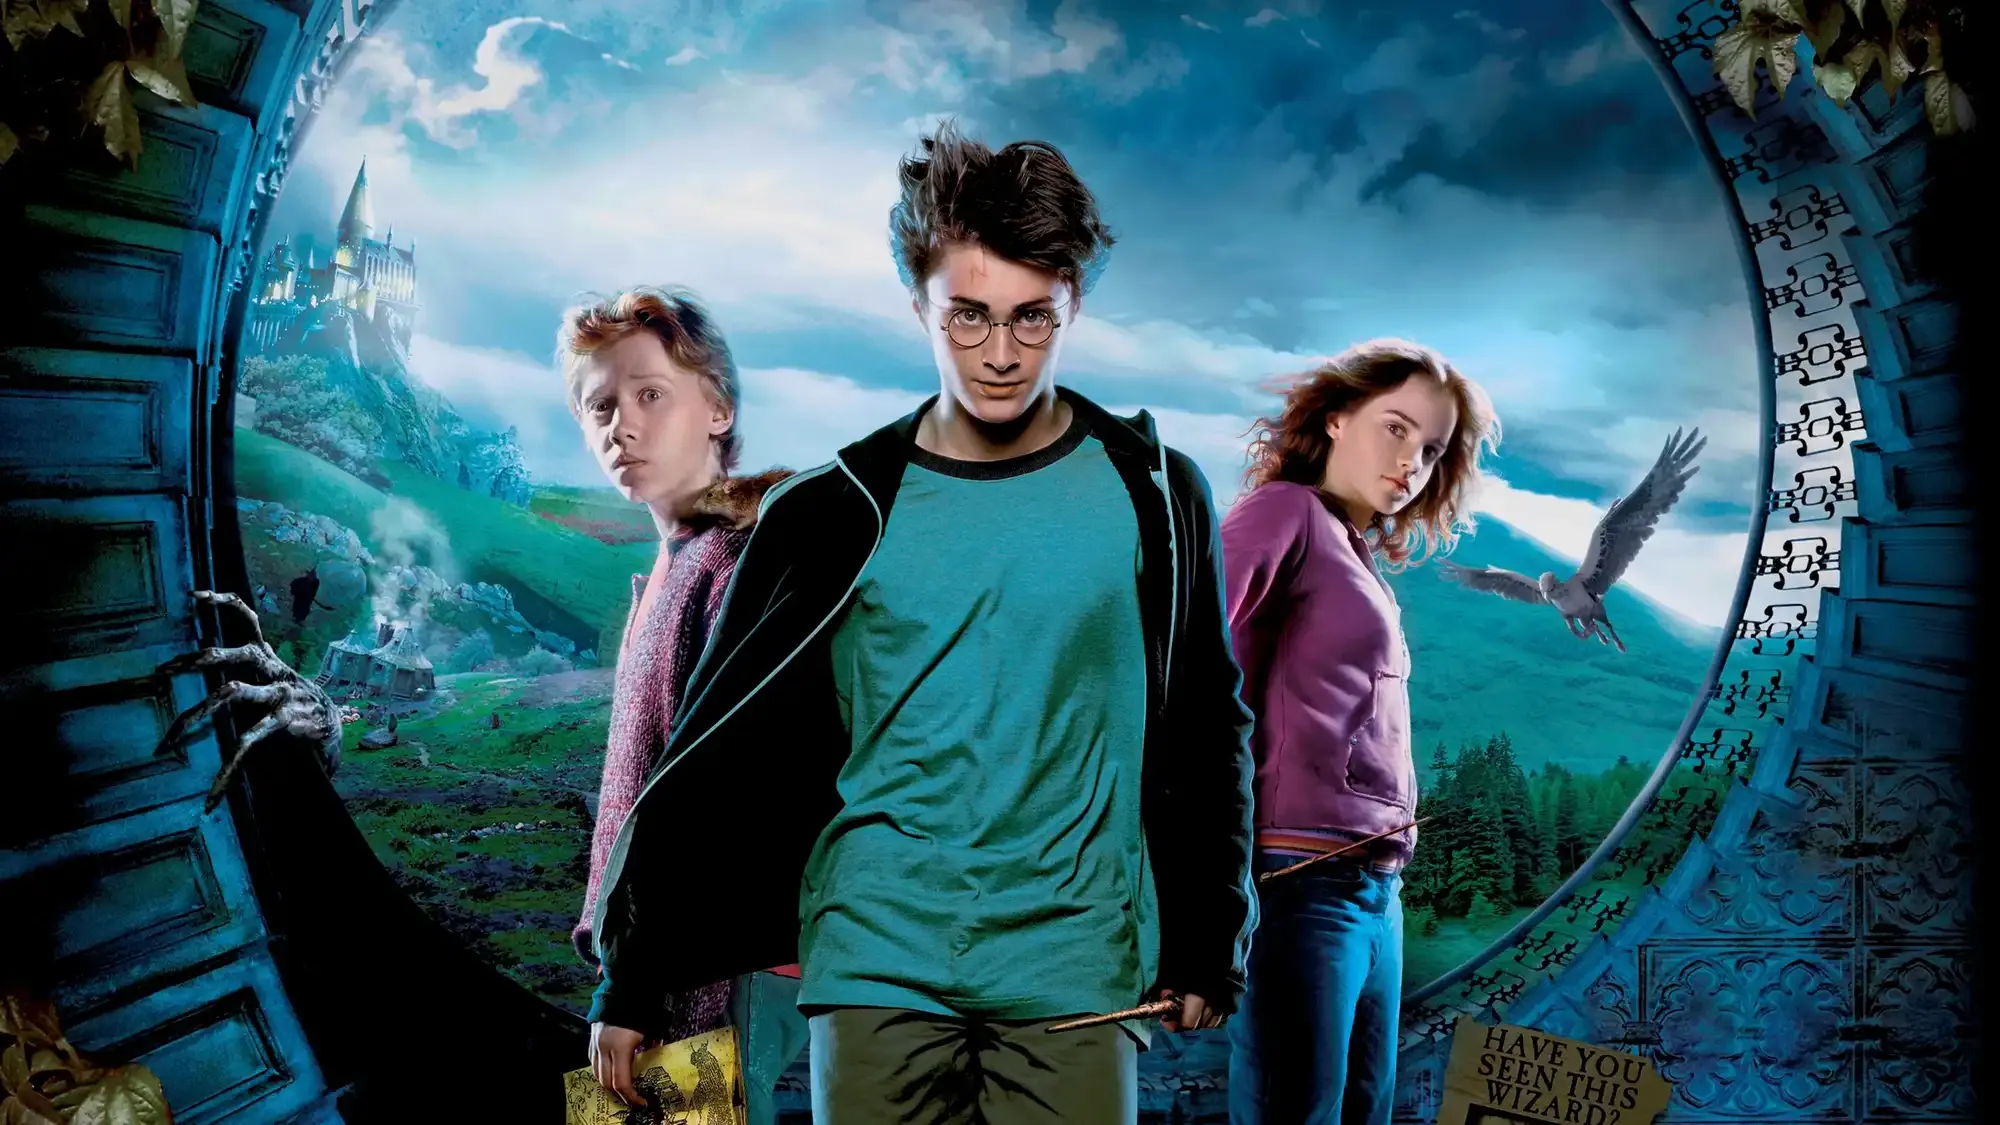 Harry Potter and the Prisoner of Azkaban movie review